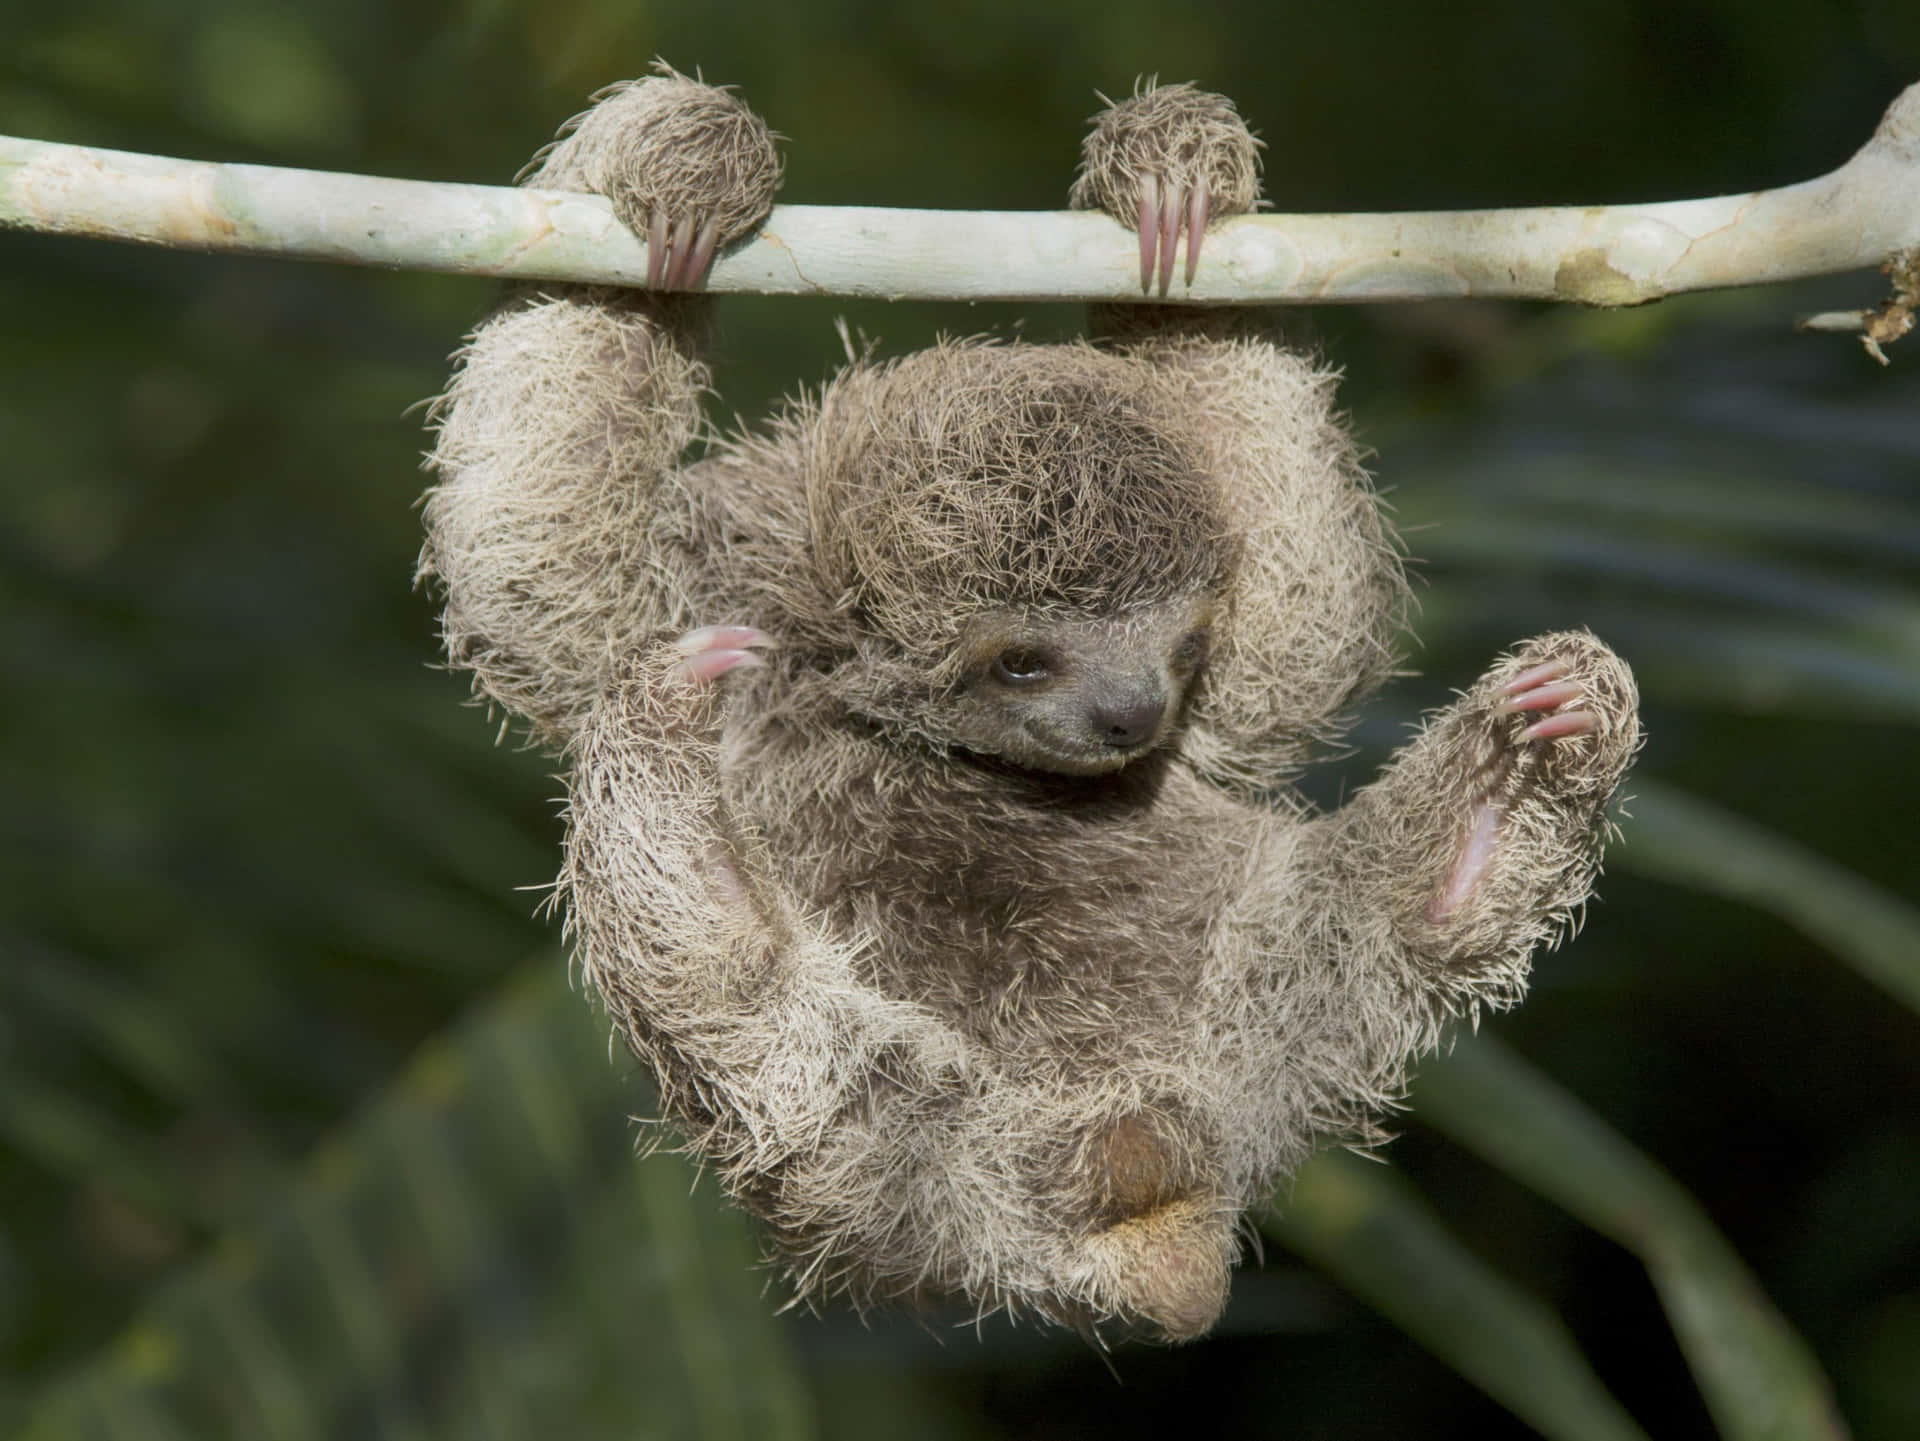 A baby sloth hangs from a low-hanging tree branch while reaching out with its long arm.